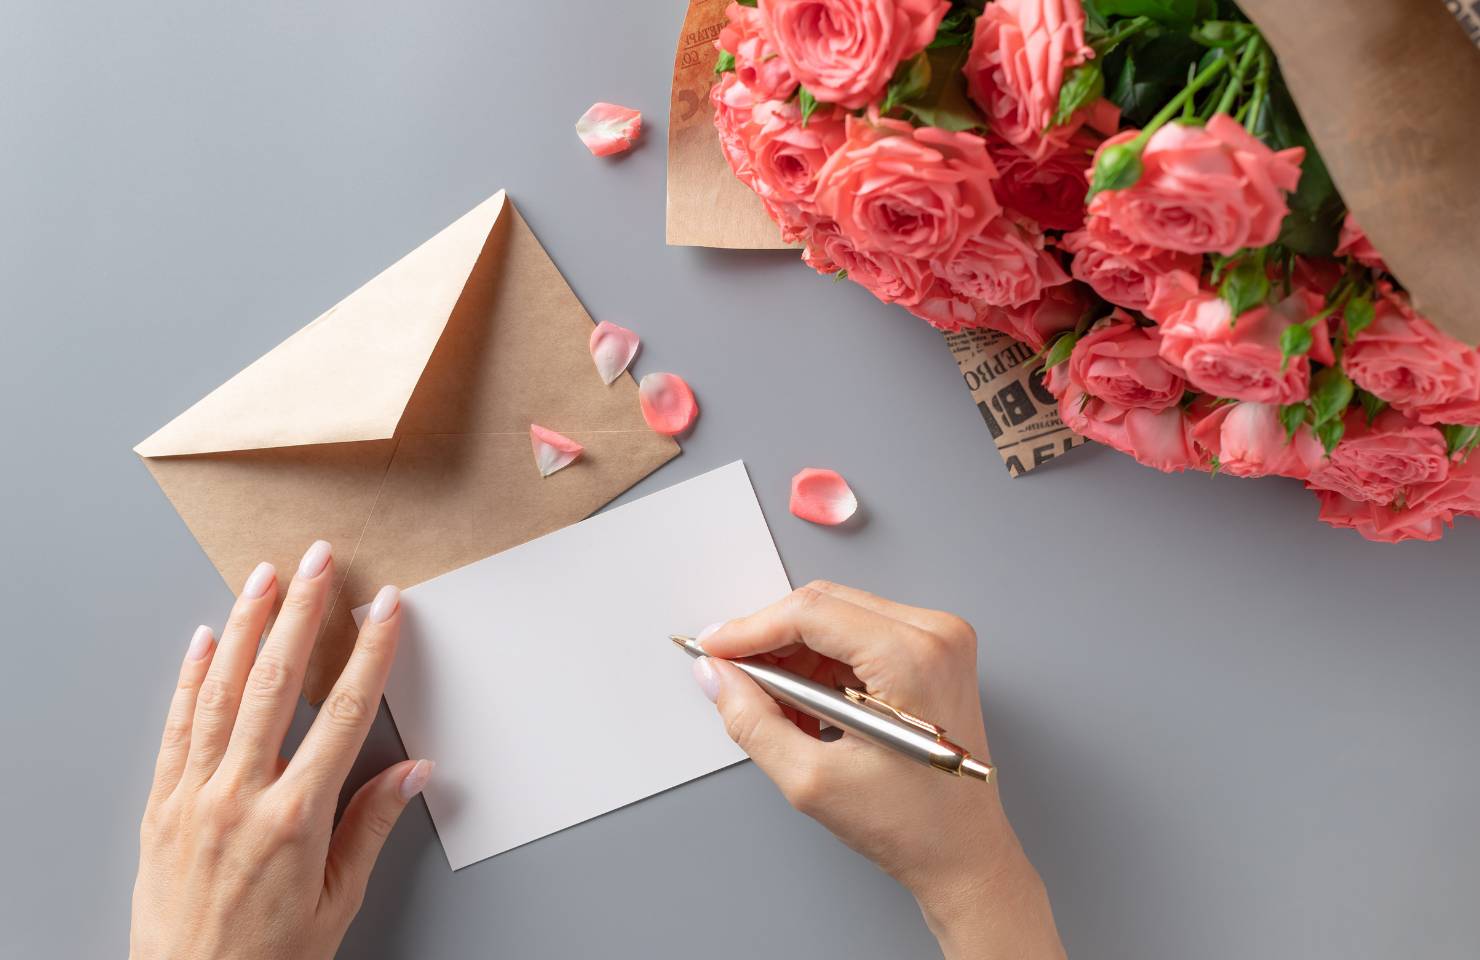 Woman beginning to write in a gift card with a bouquet of flowers